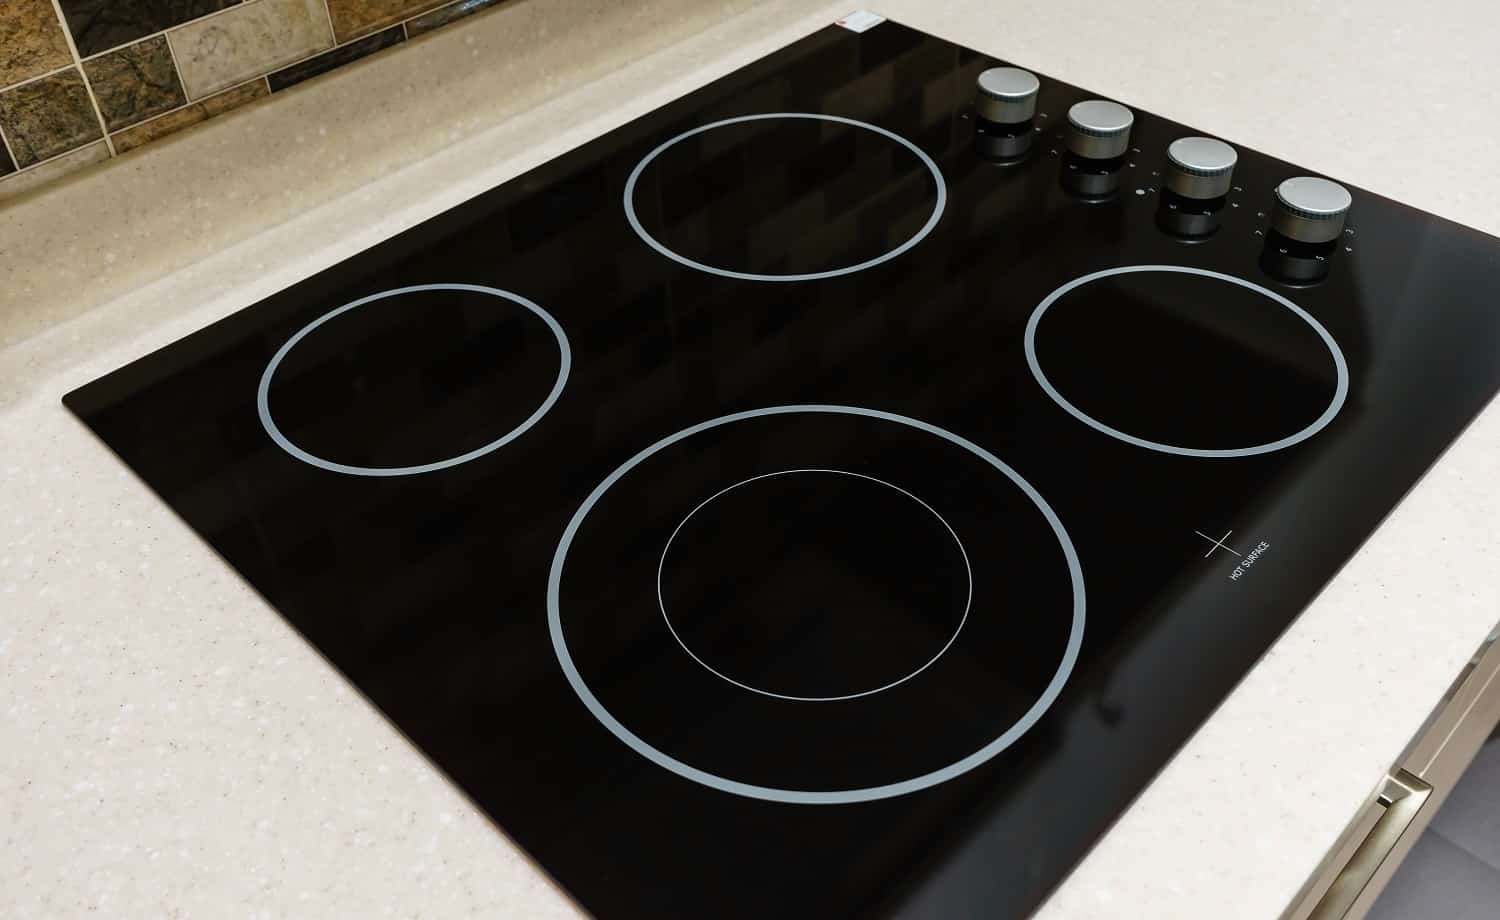 Modern black induction stove, cooker, hob or built in cooktop with ceramic top in white kitchen interior